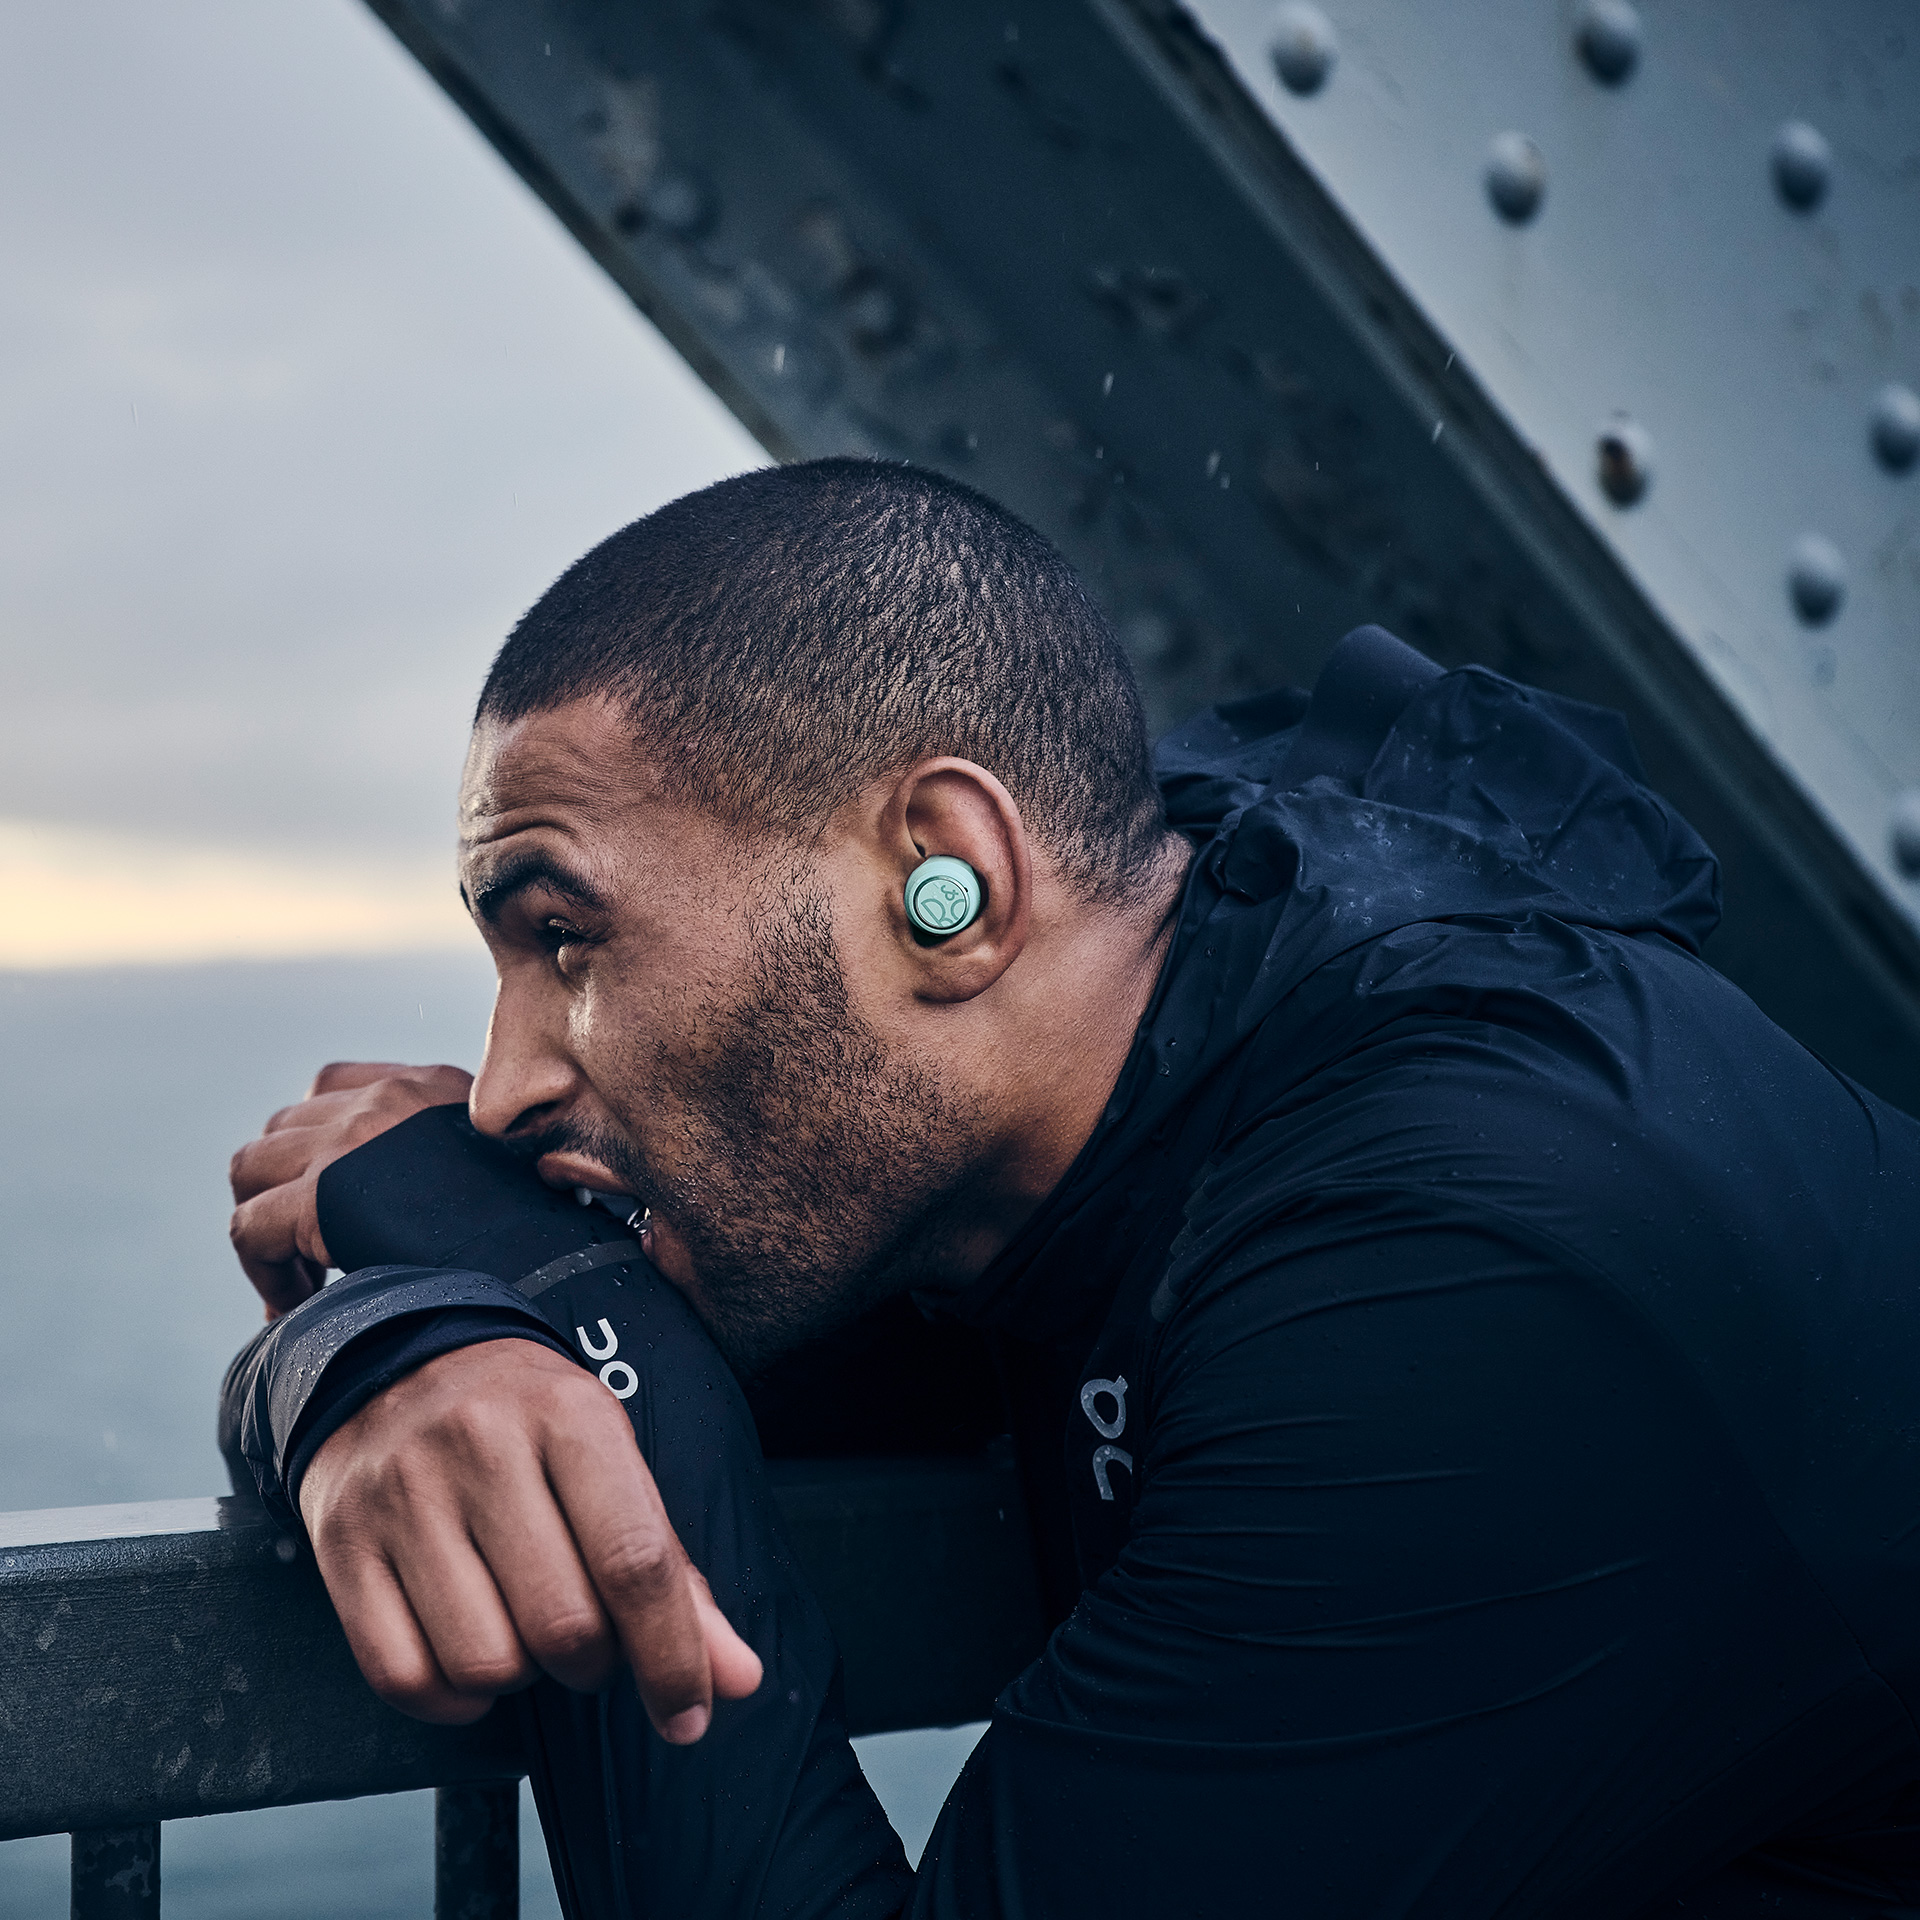 Beoplay E8 sport - Features - WEATHERPROOF Image